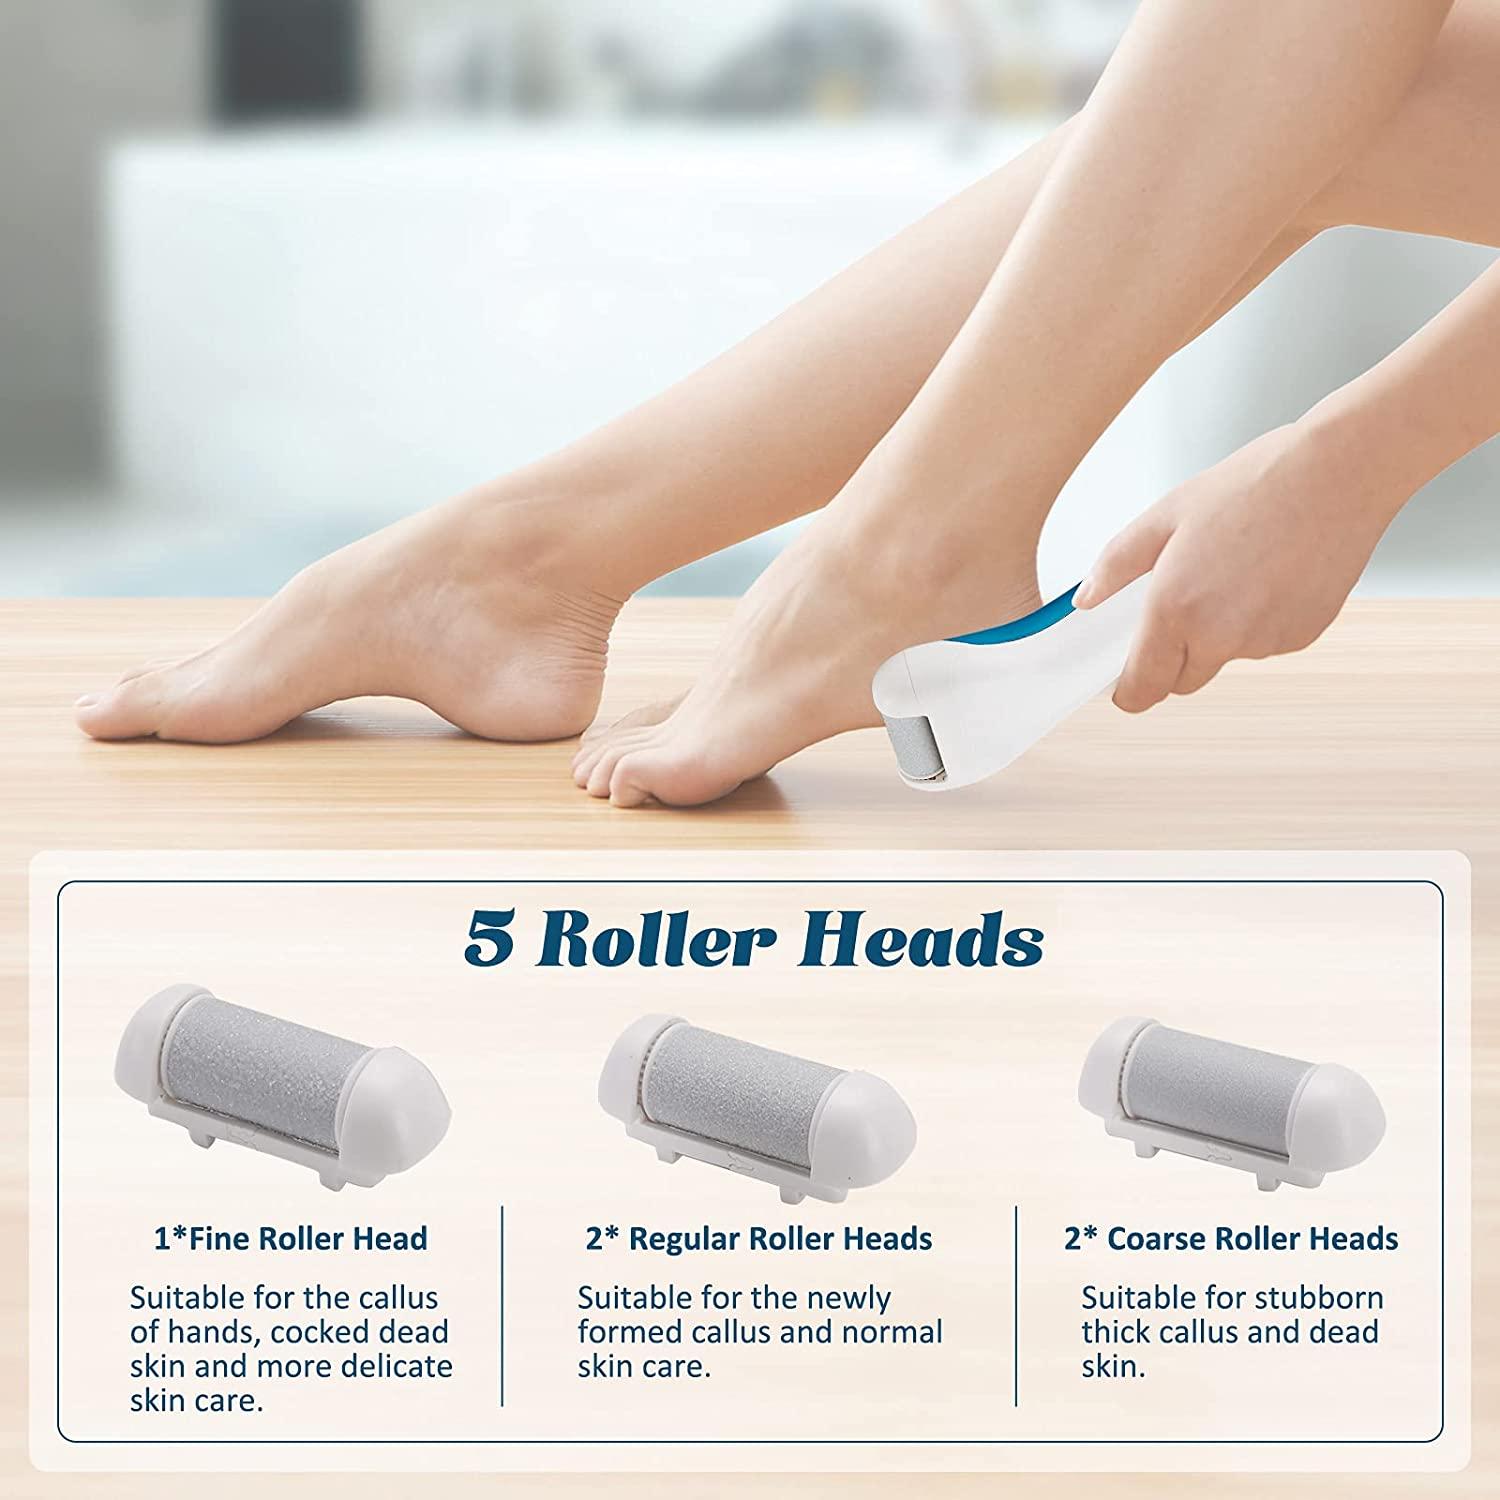 Callus Remover For Feet, Electric Foot File Rechargeable Foot